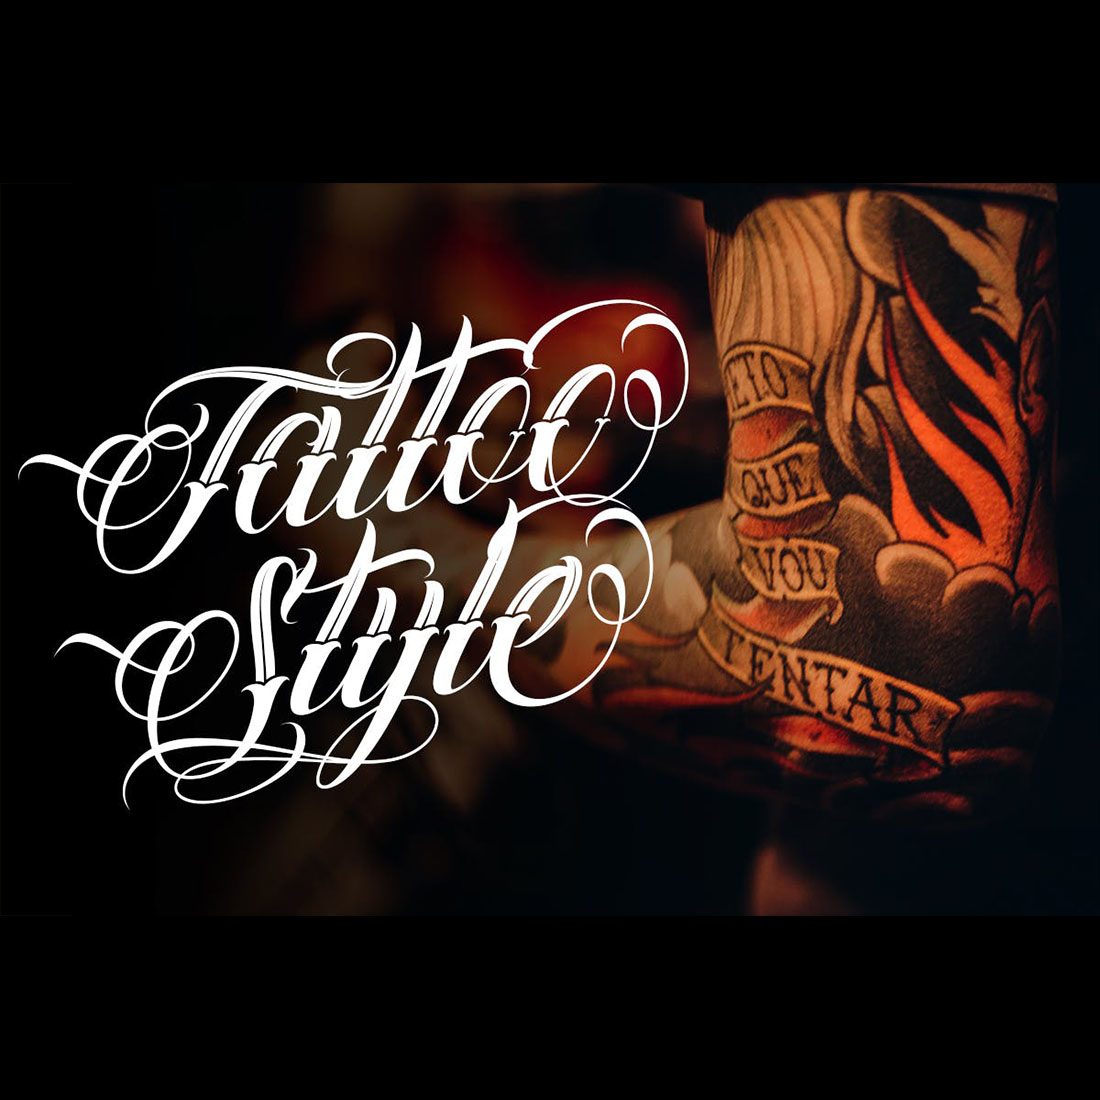 How to Write Chicano tattoos lettering || Calligraphy A to Z tutorial for  beginners - YouTube